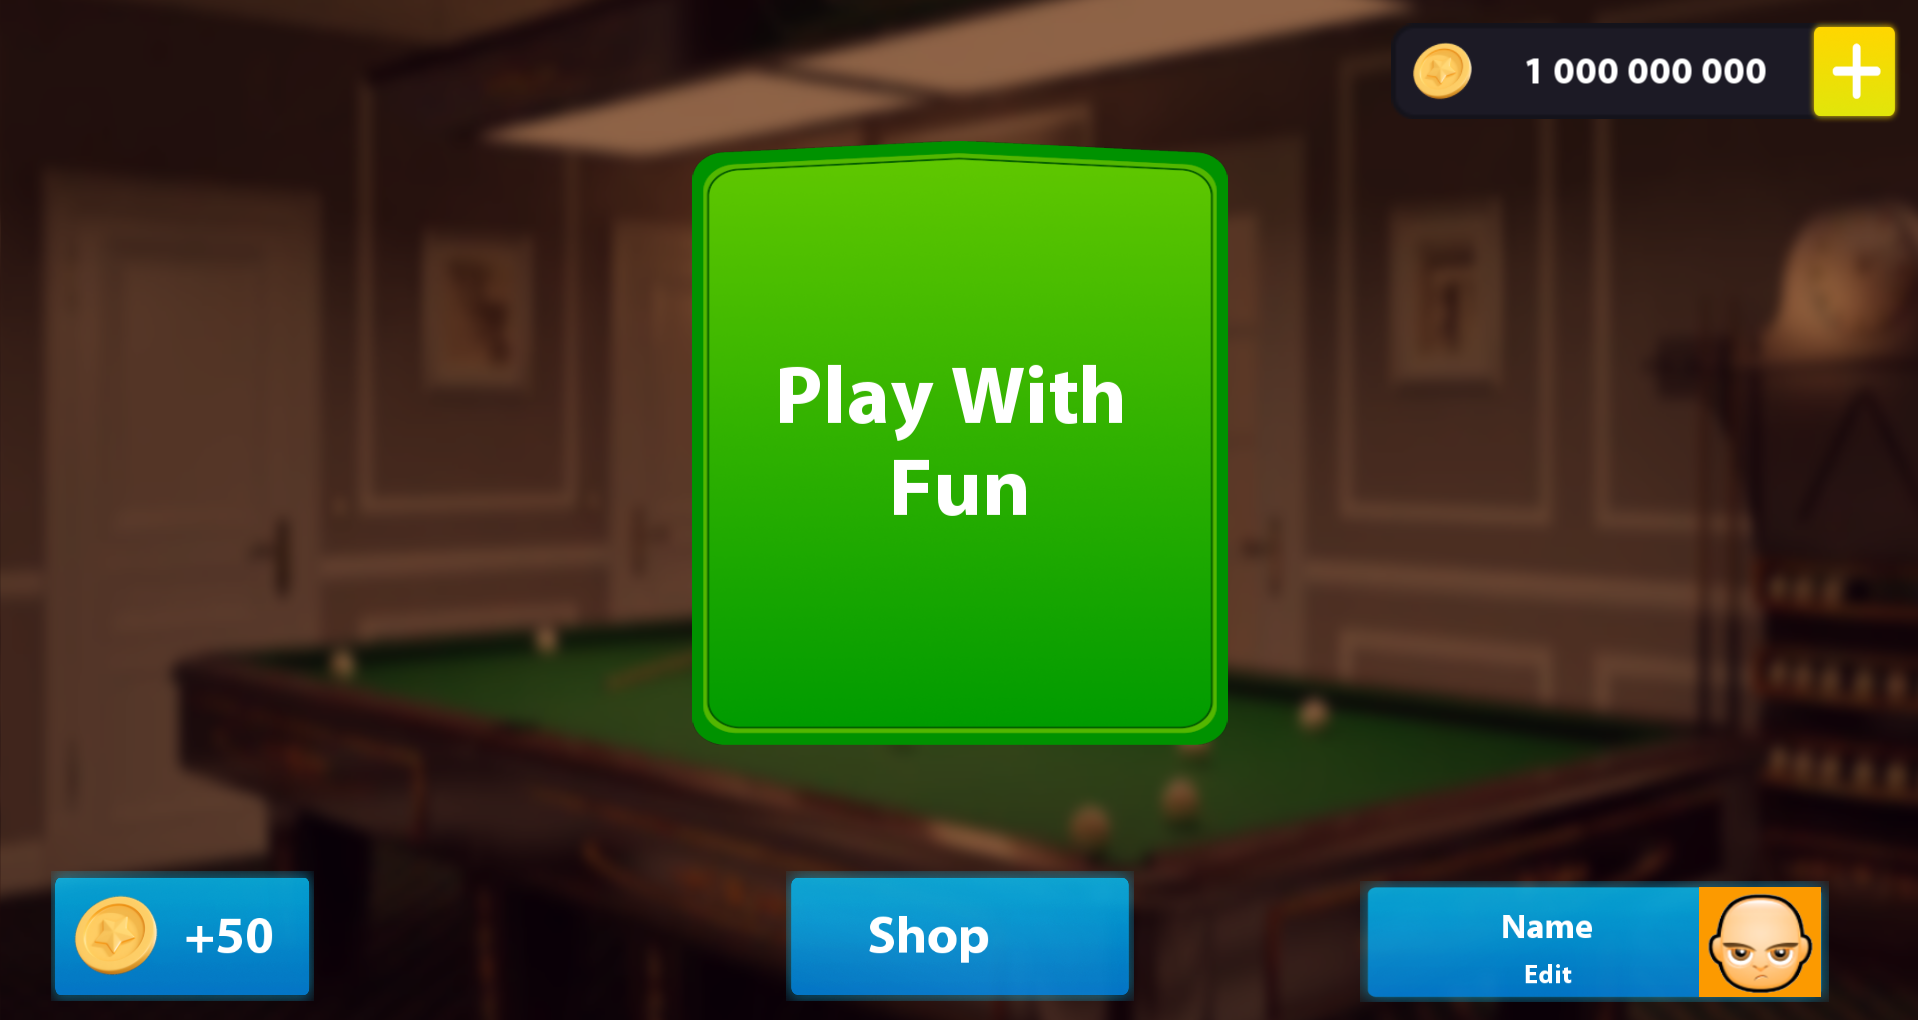 Snooker Live Pro - Download do APK para Android